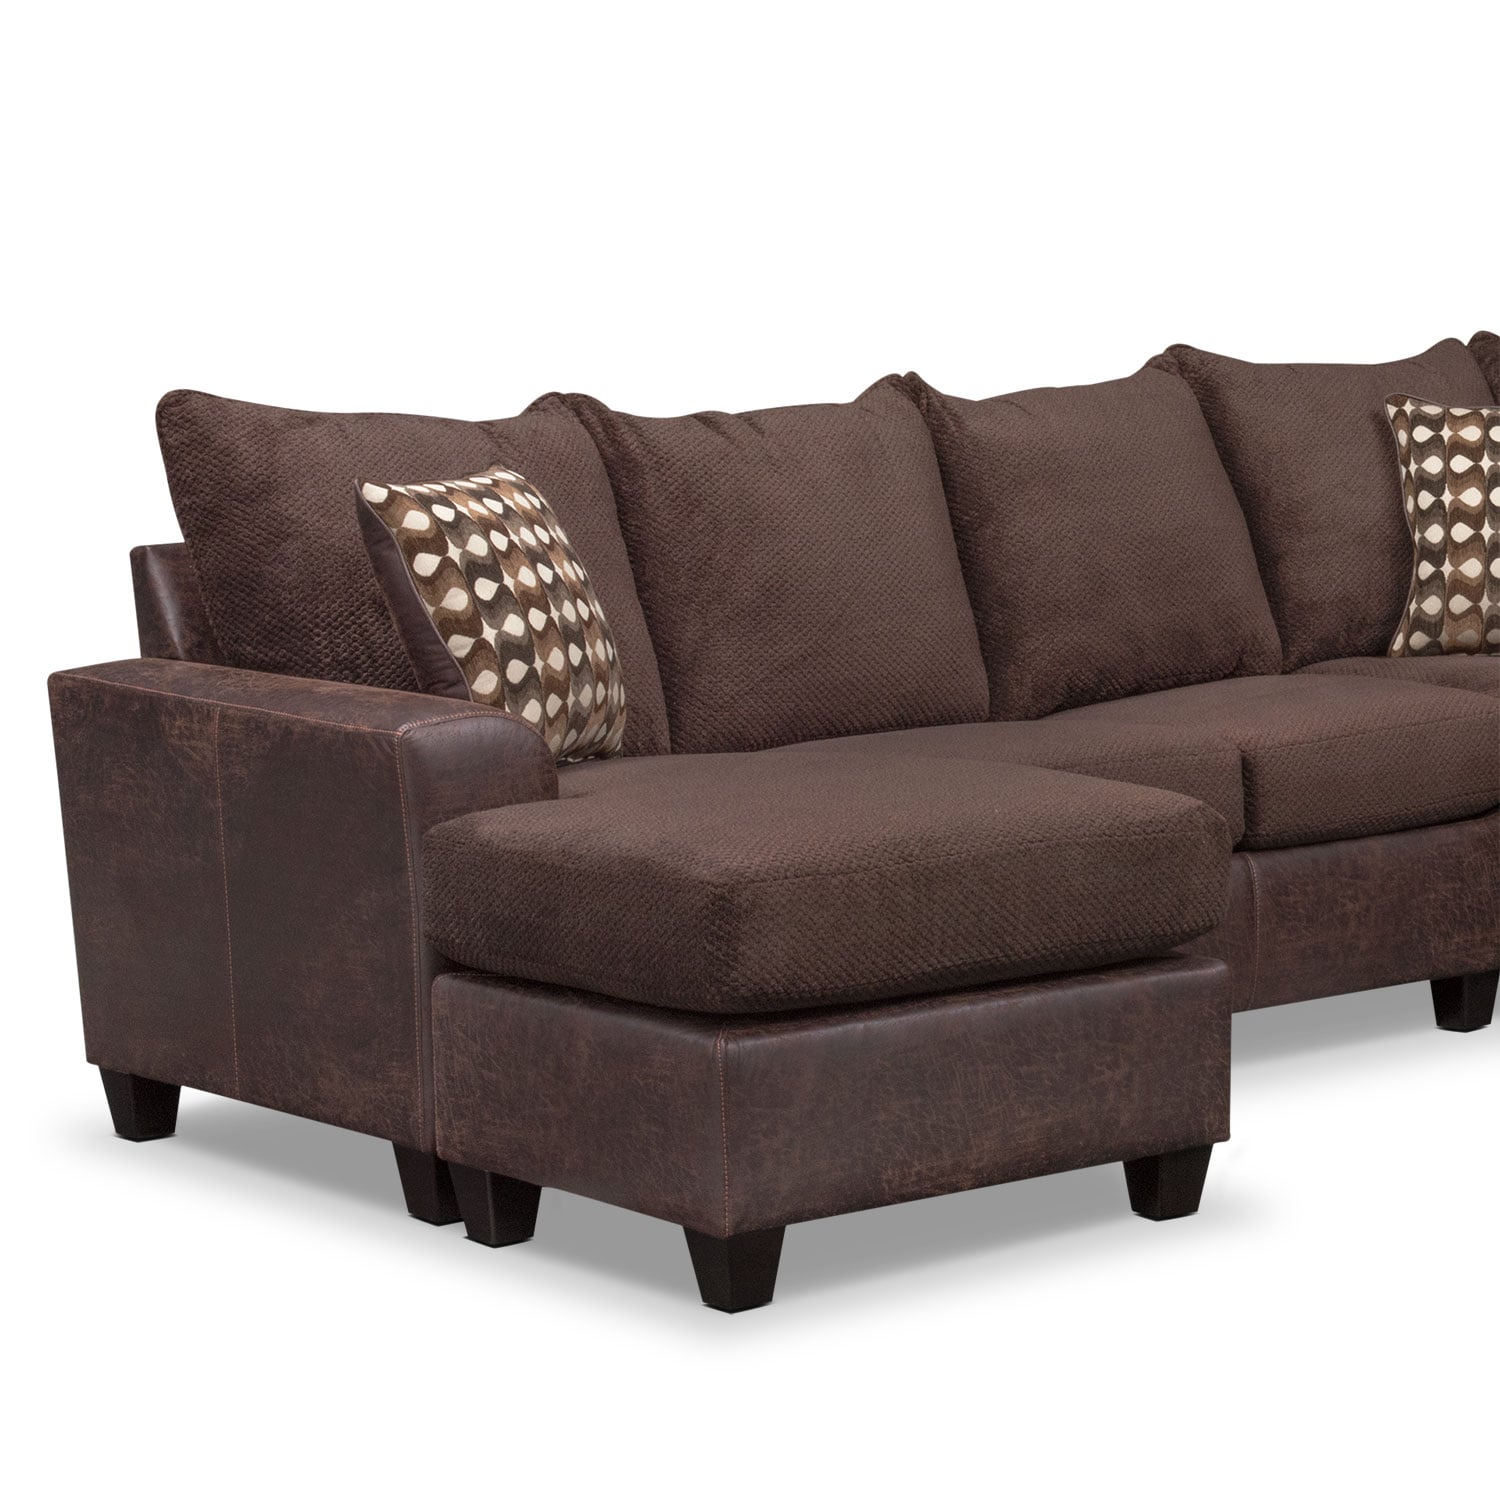 Brando 3Piece Sectional with Modular Chaise Chocolate American Signature Furniture